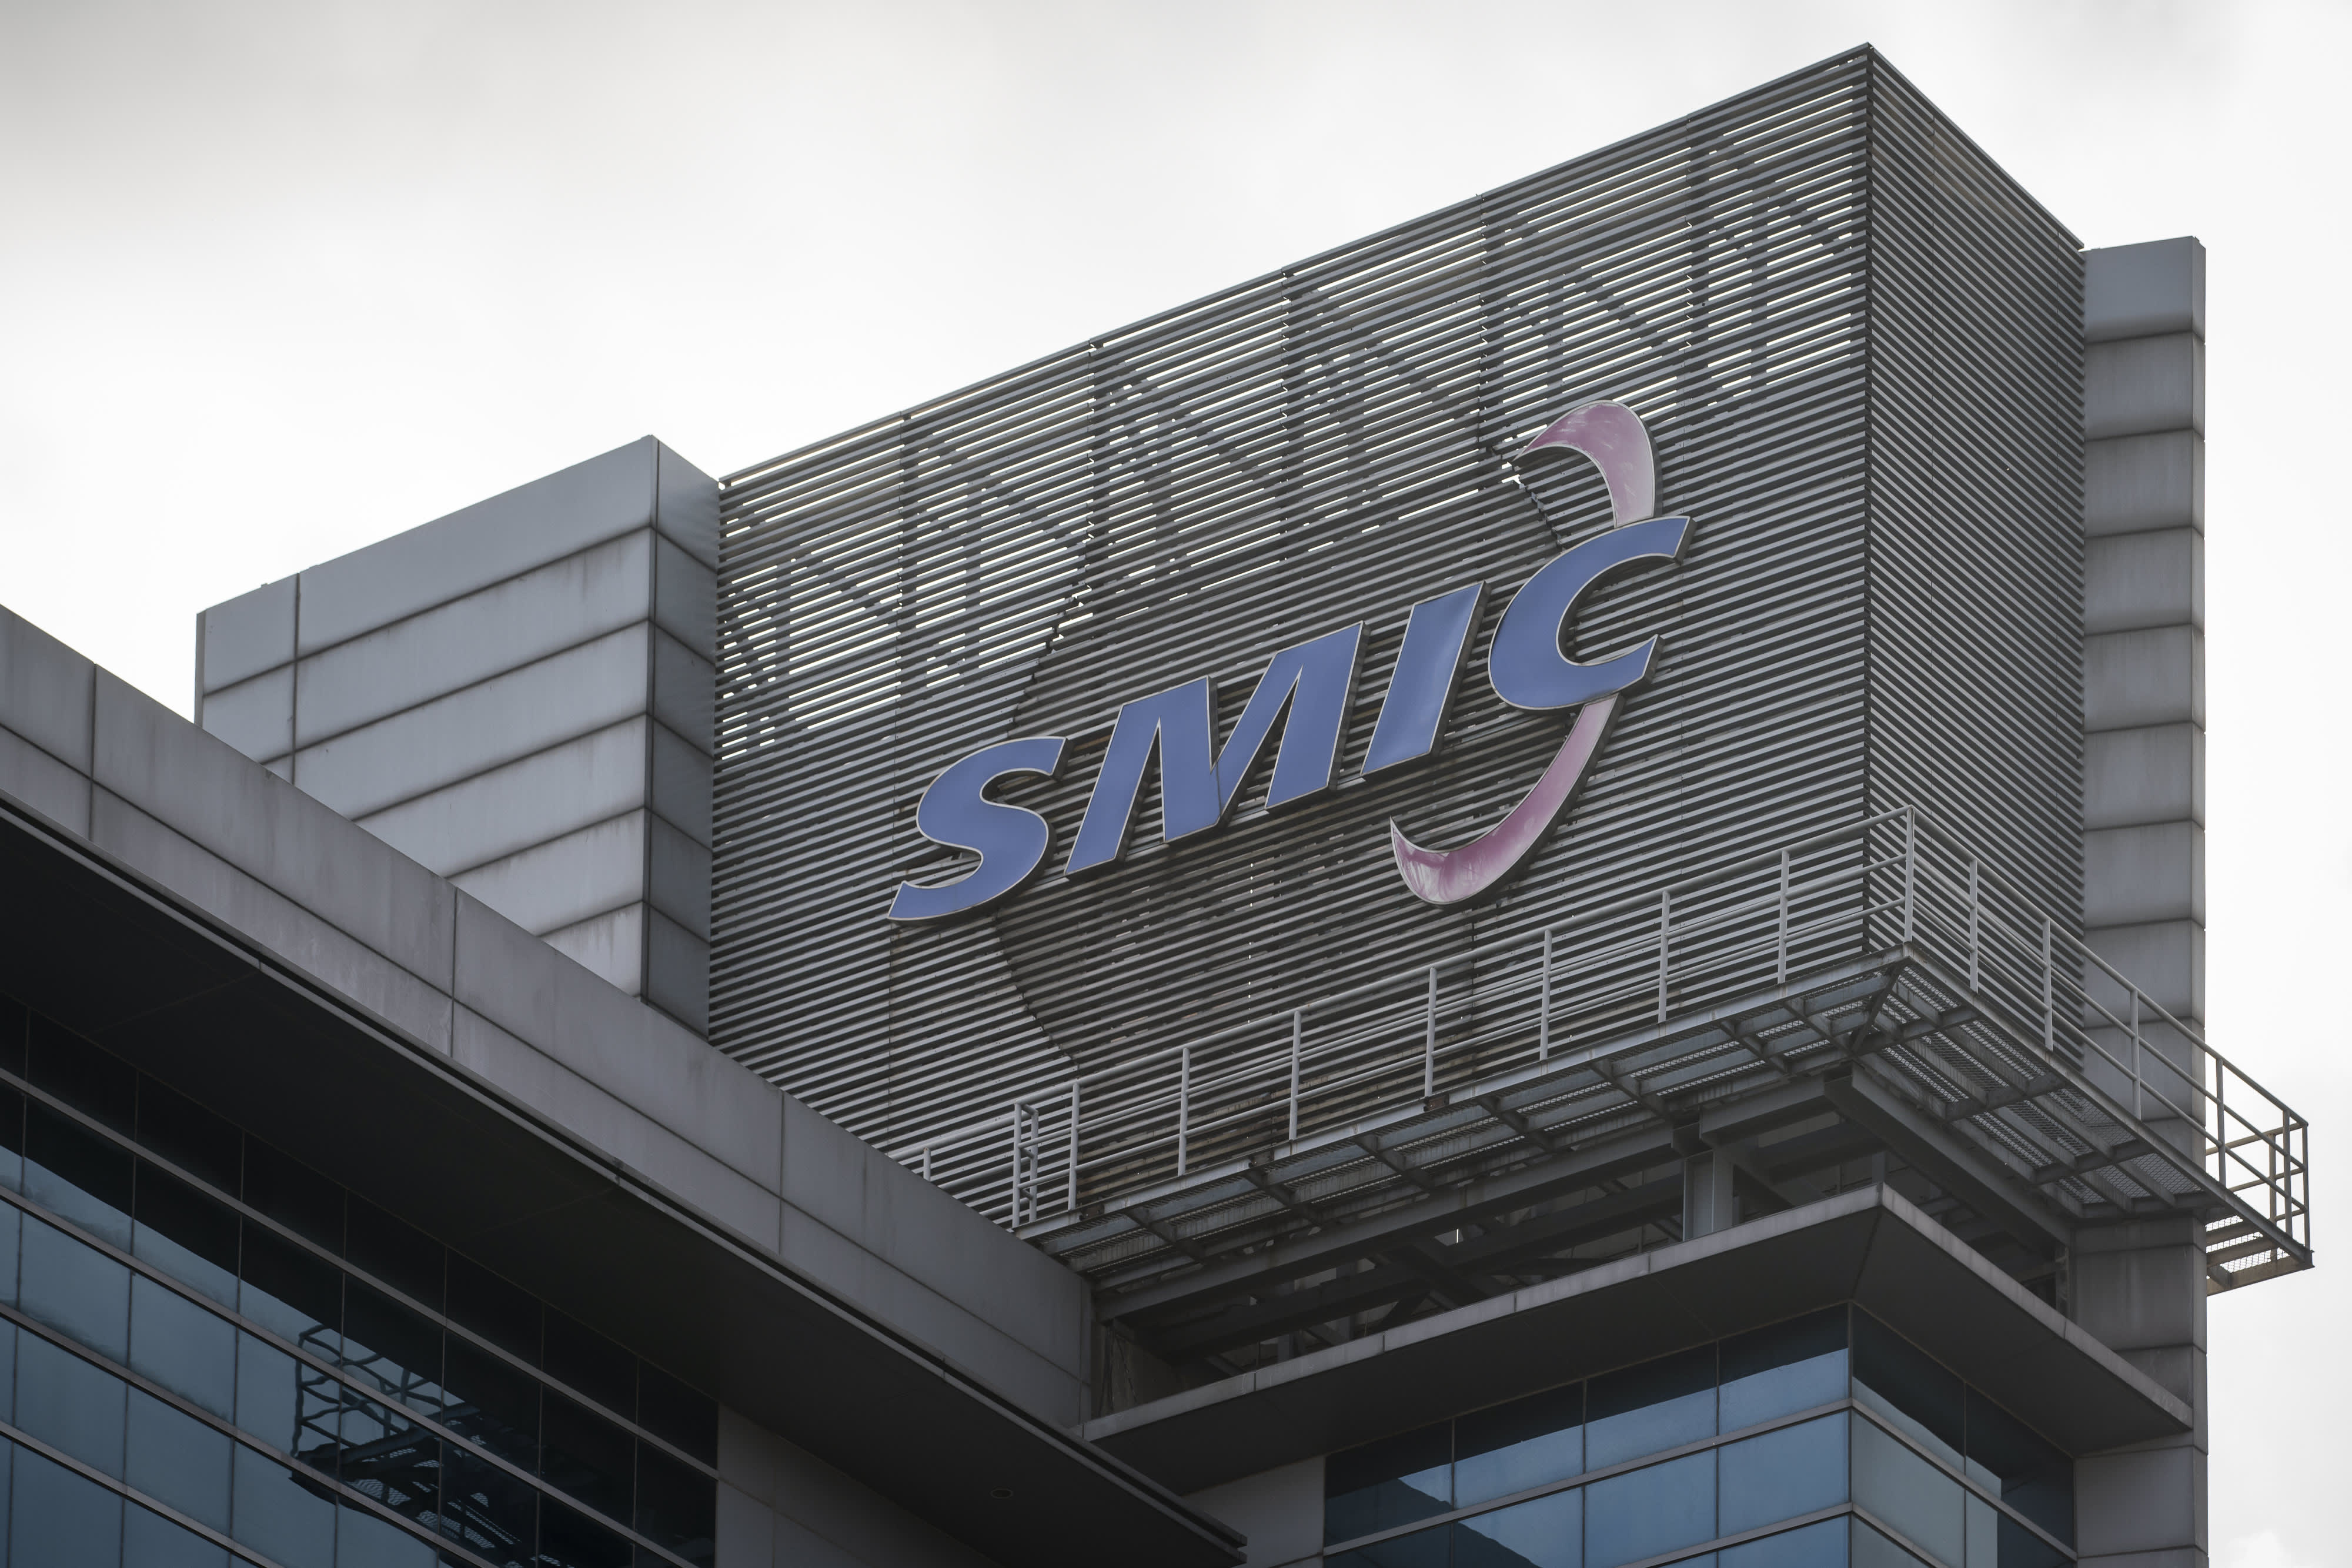 SMIC, China’s largest semiconductor manufacturer, will build a $ 2.35 billion plant